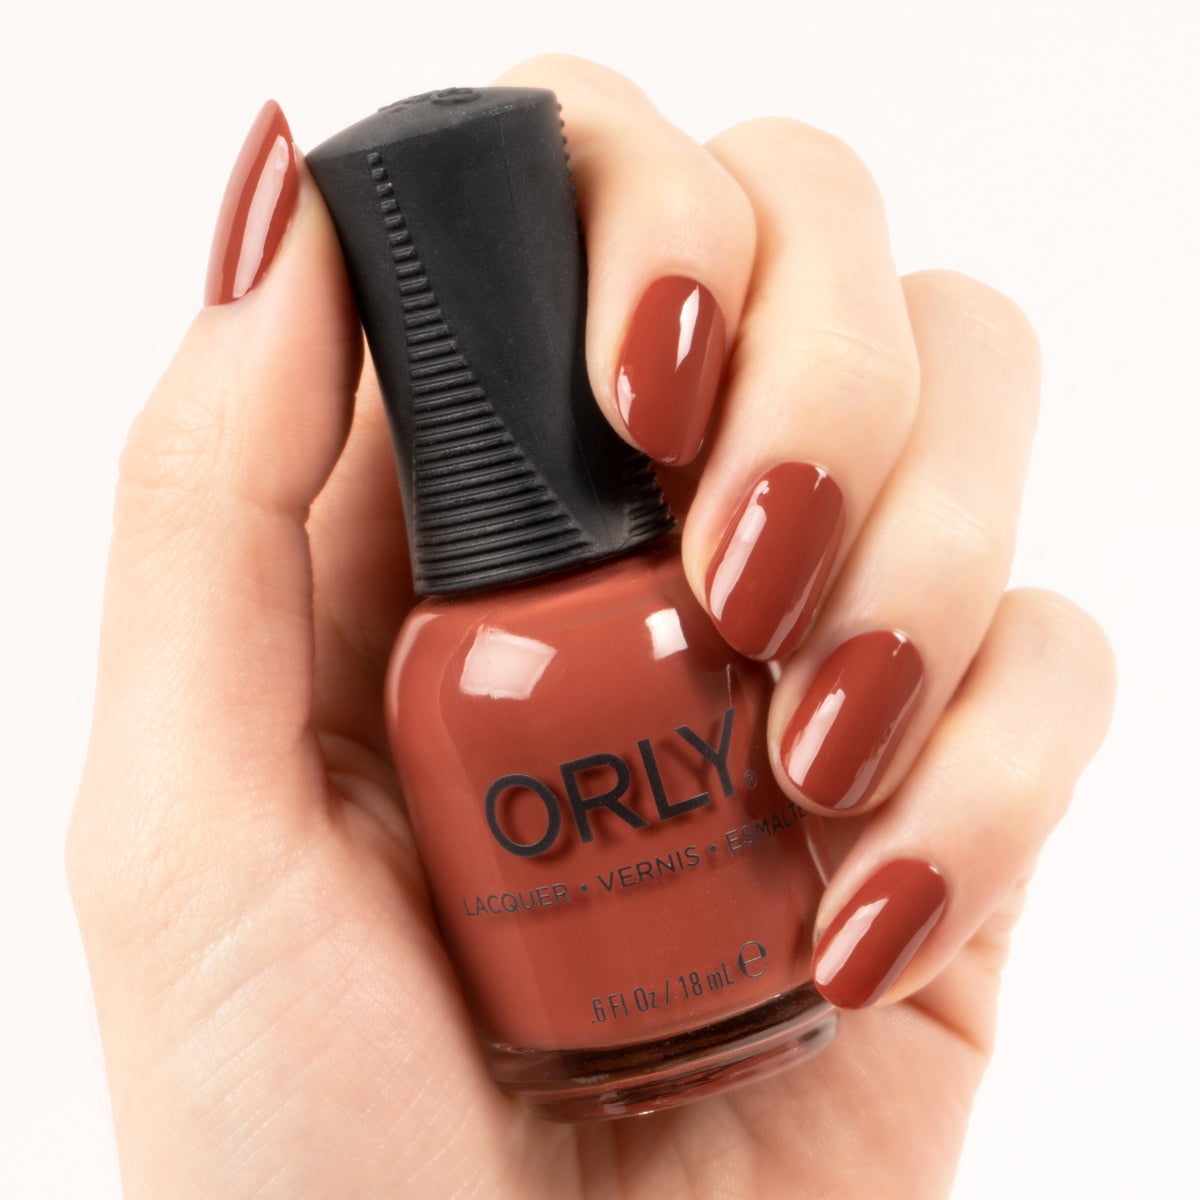 ORLY Steal The Spotlight - Review and Swatches